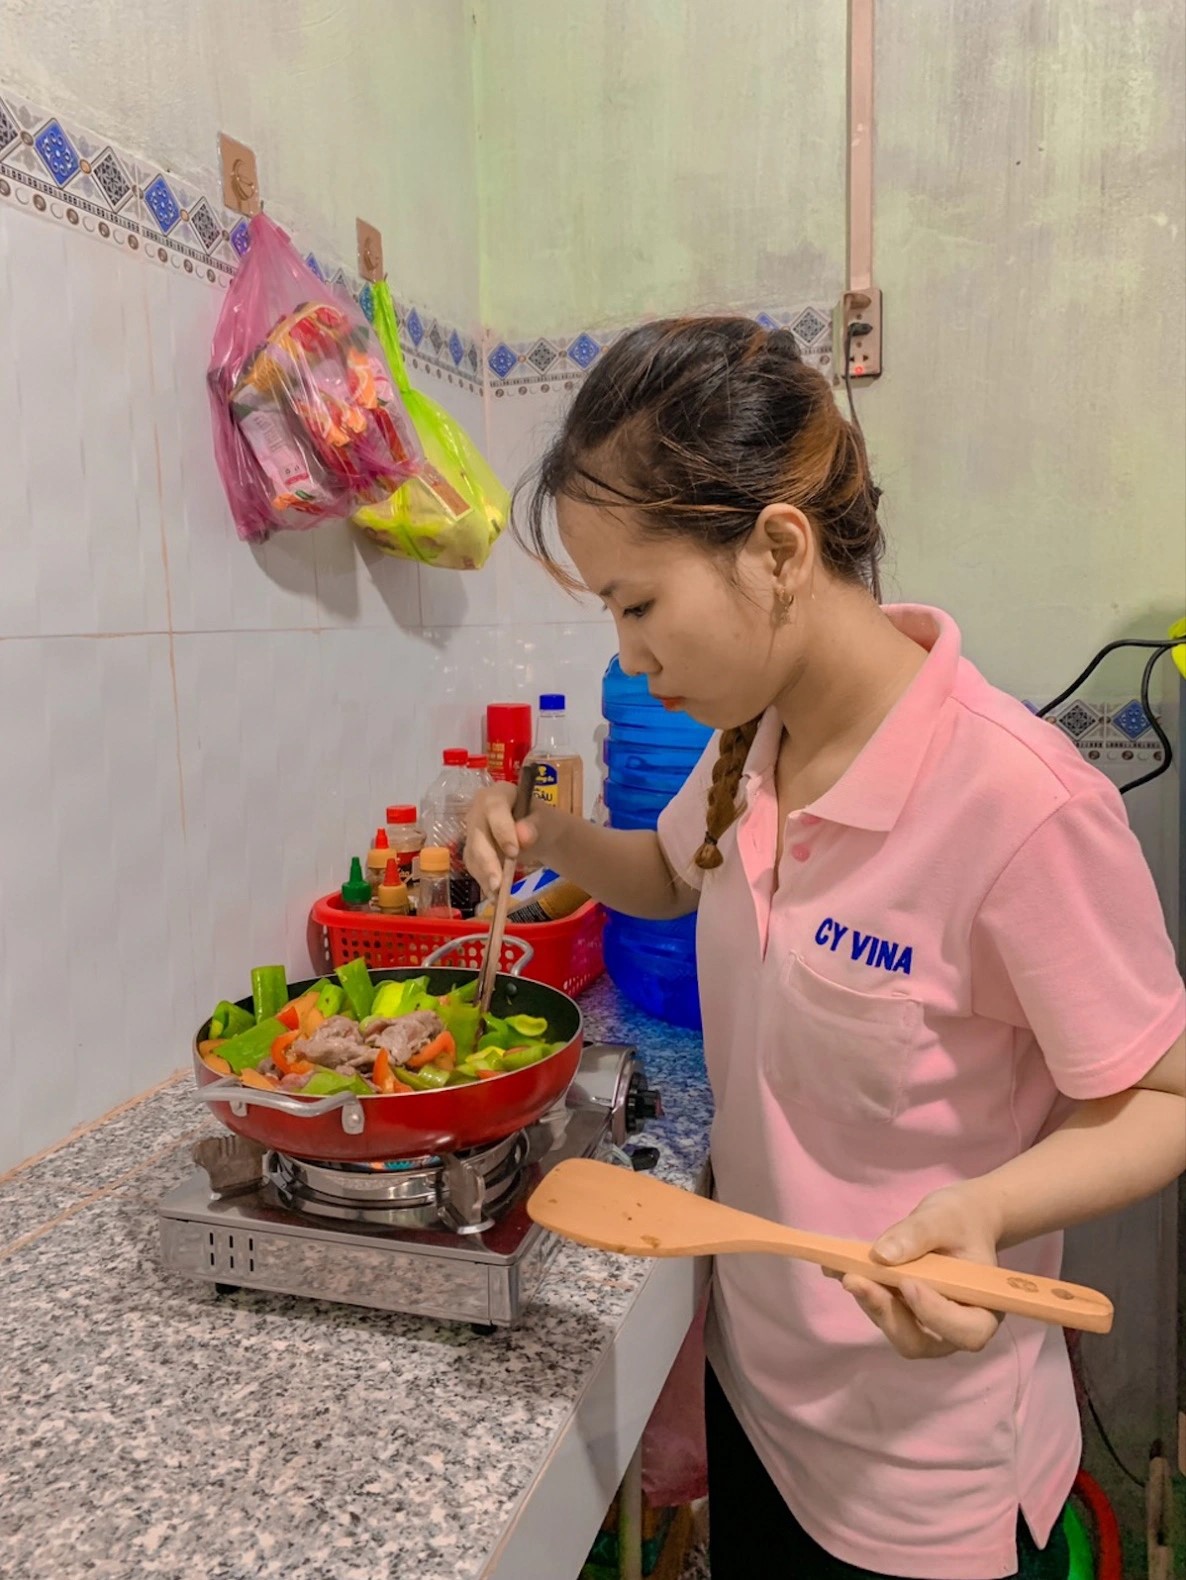 Thu Trang prepares dinner while making the video she will post on TikTok. Photo provided